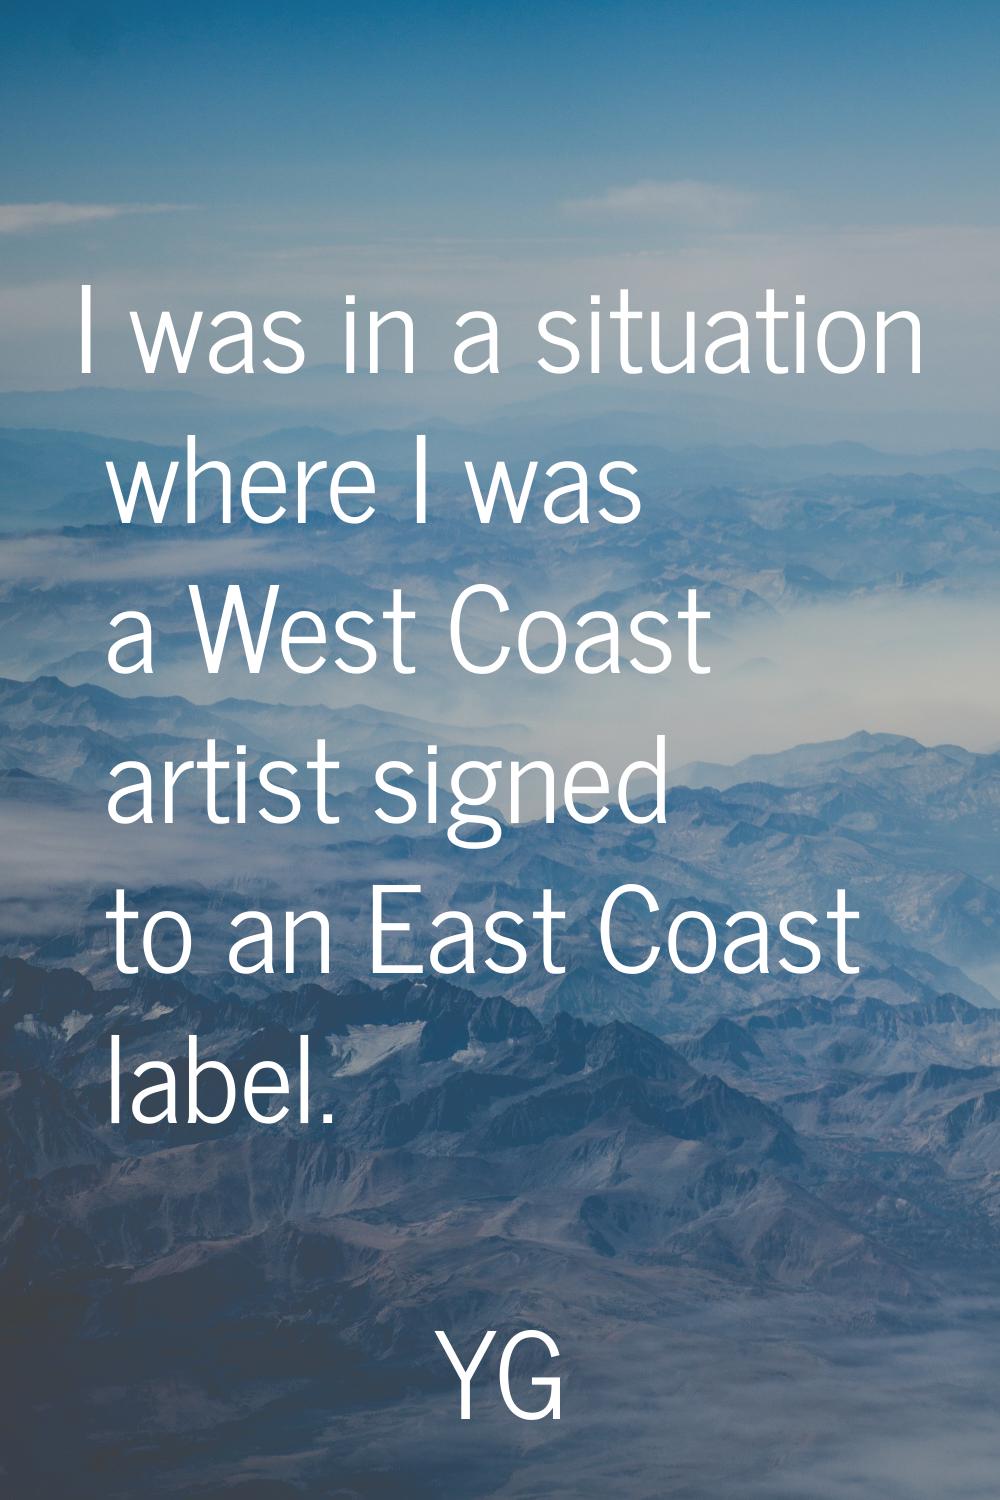 I was in a situation where I was a West Coast artist signed to an East Coast label.